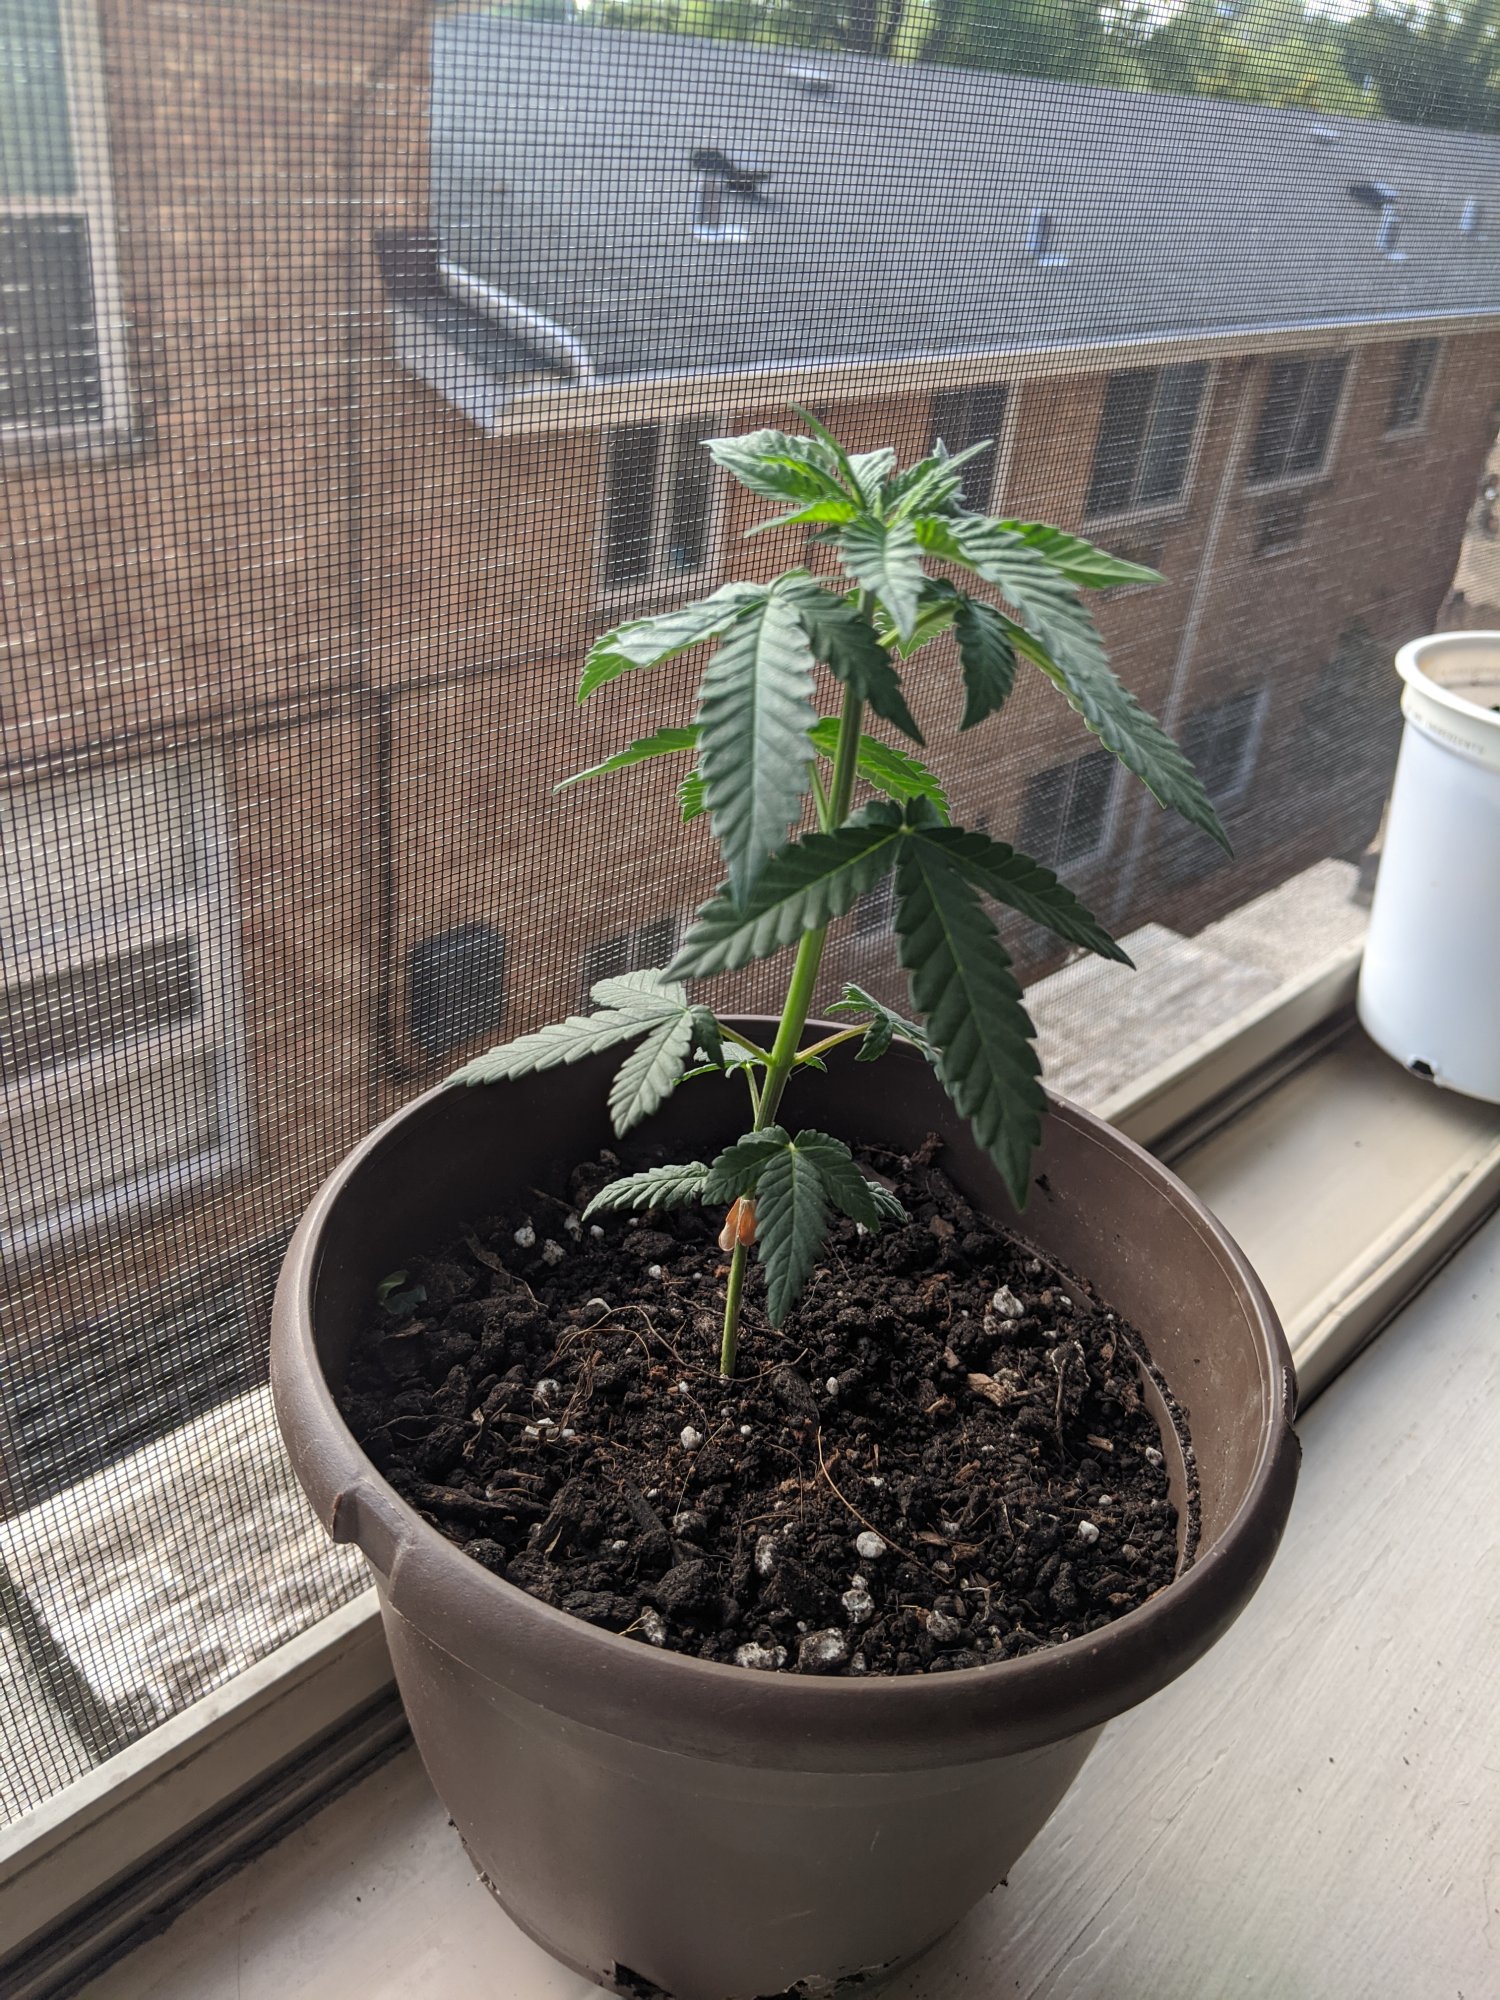 Will this plant be okay